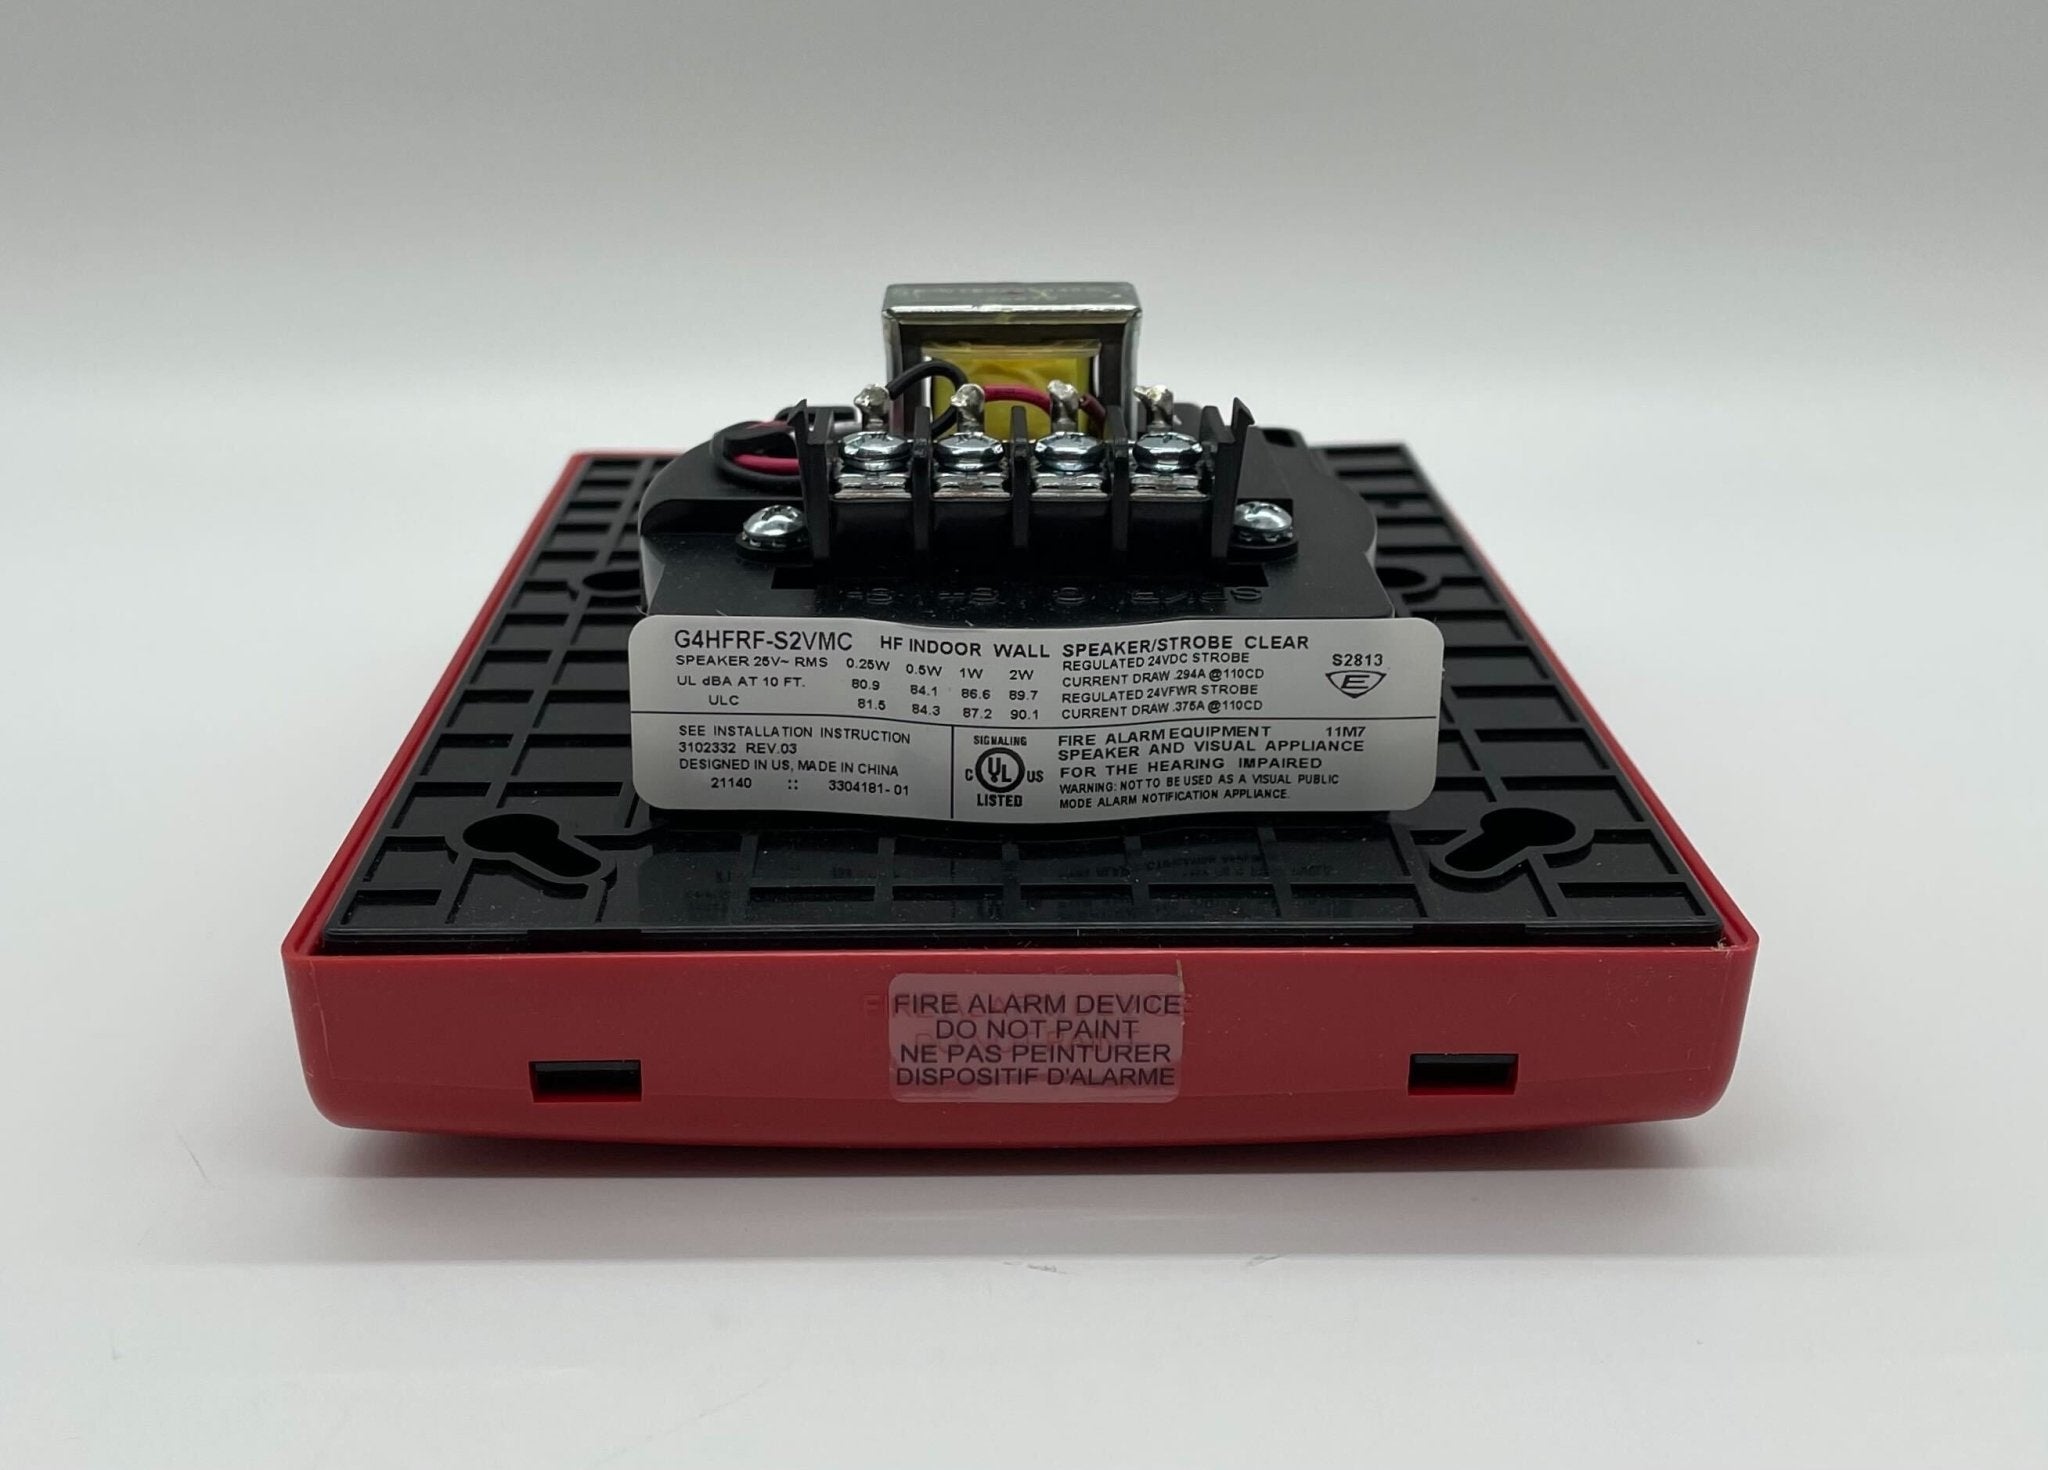 Edwards G4HFRF-S2VMC - The Fire Alarm Supplier